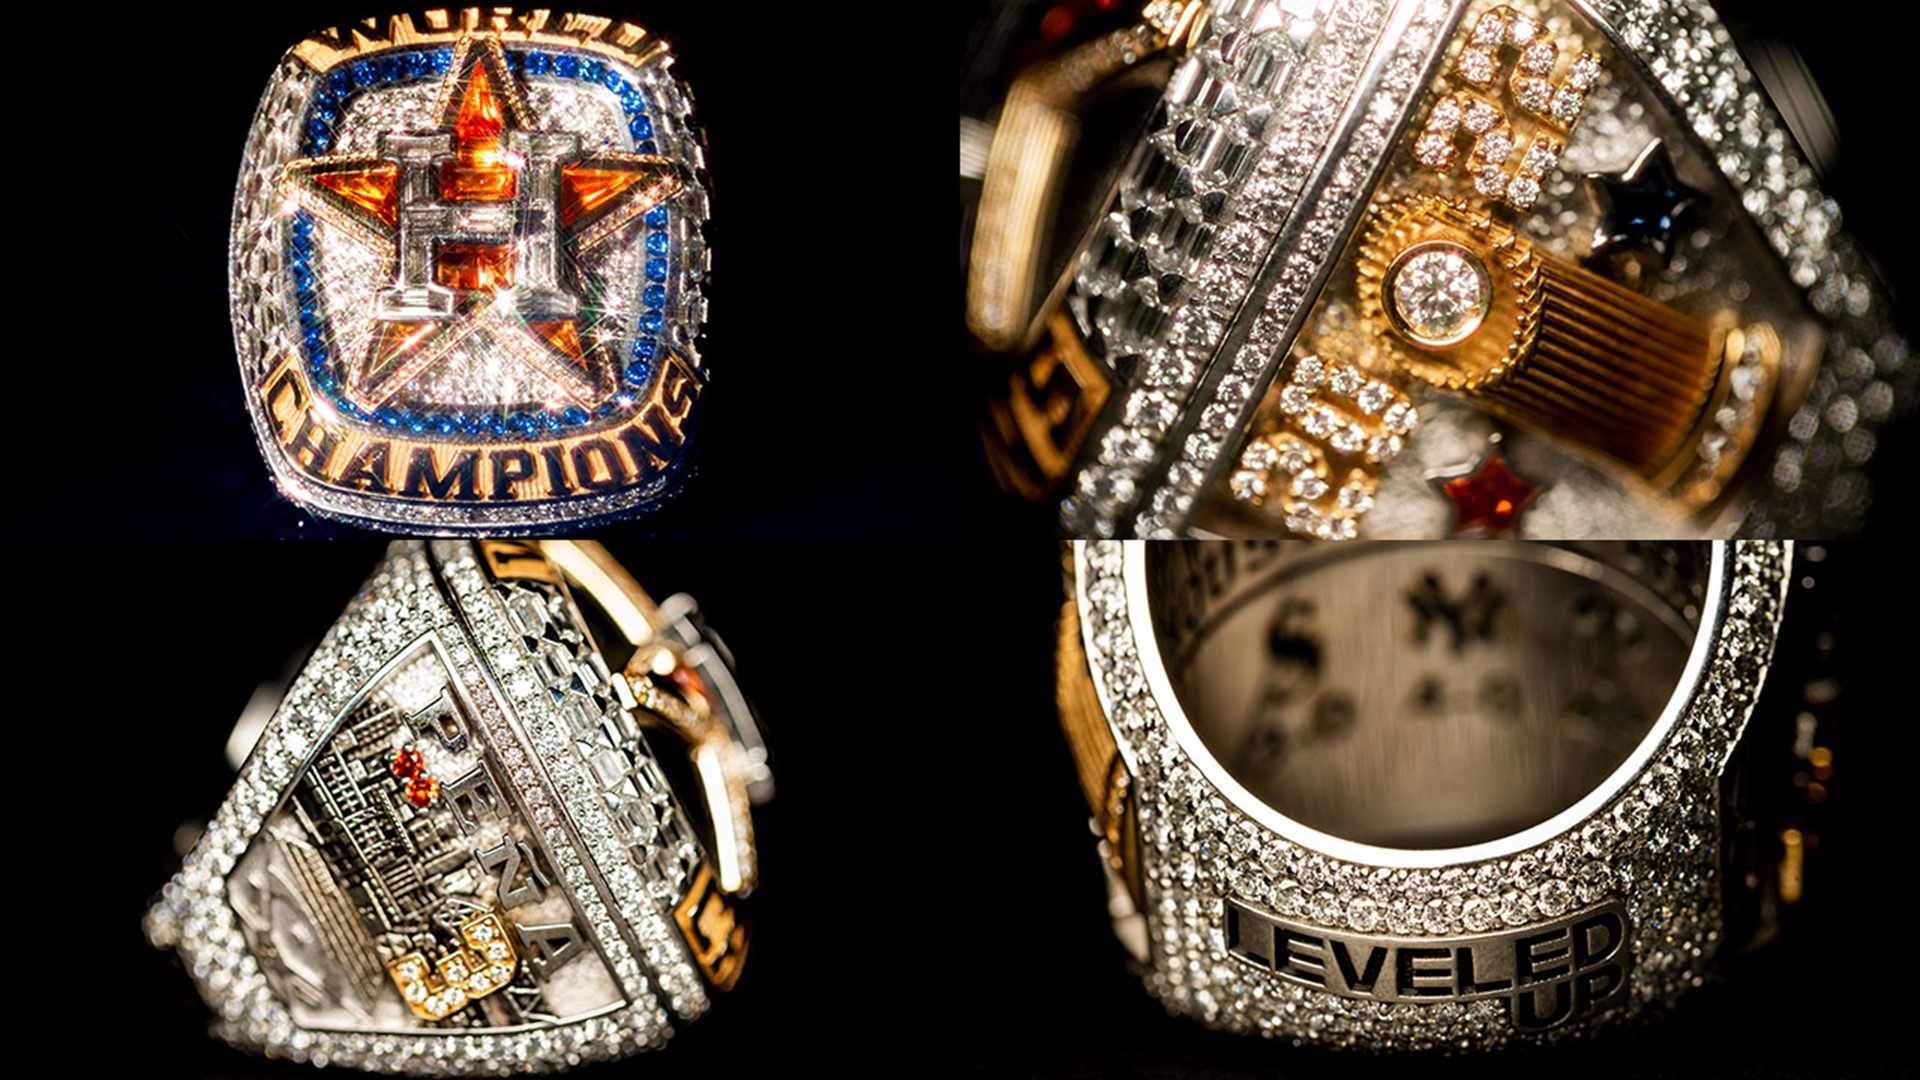 The team got their jewelry Friday night at Minute Maid Park